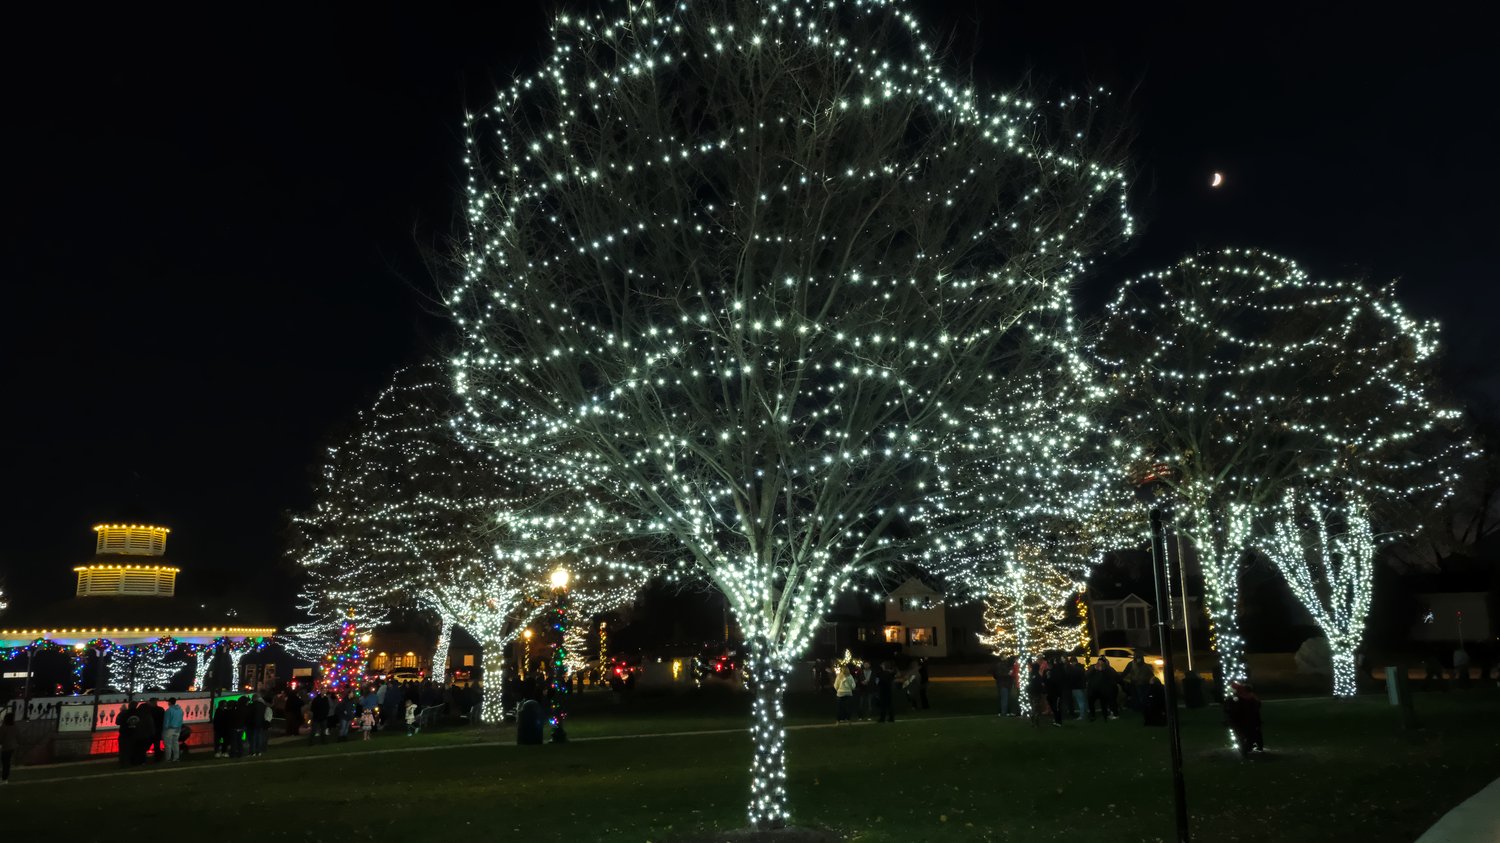 Veteran's Memorial Park in McHenry all lit up for the holidays.